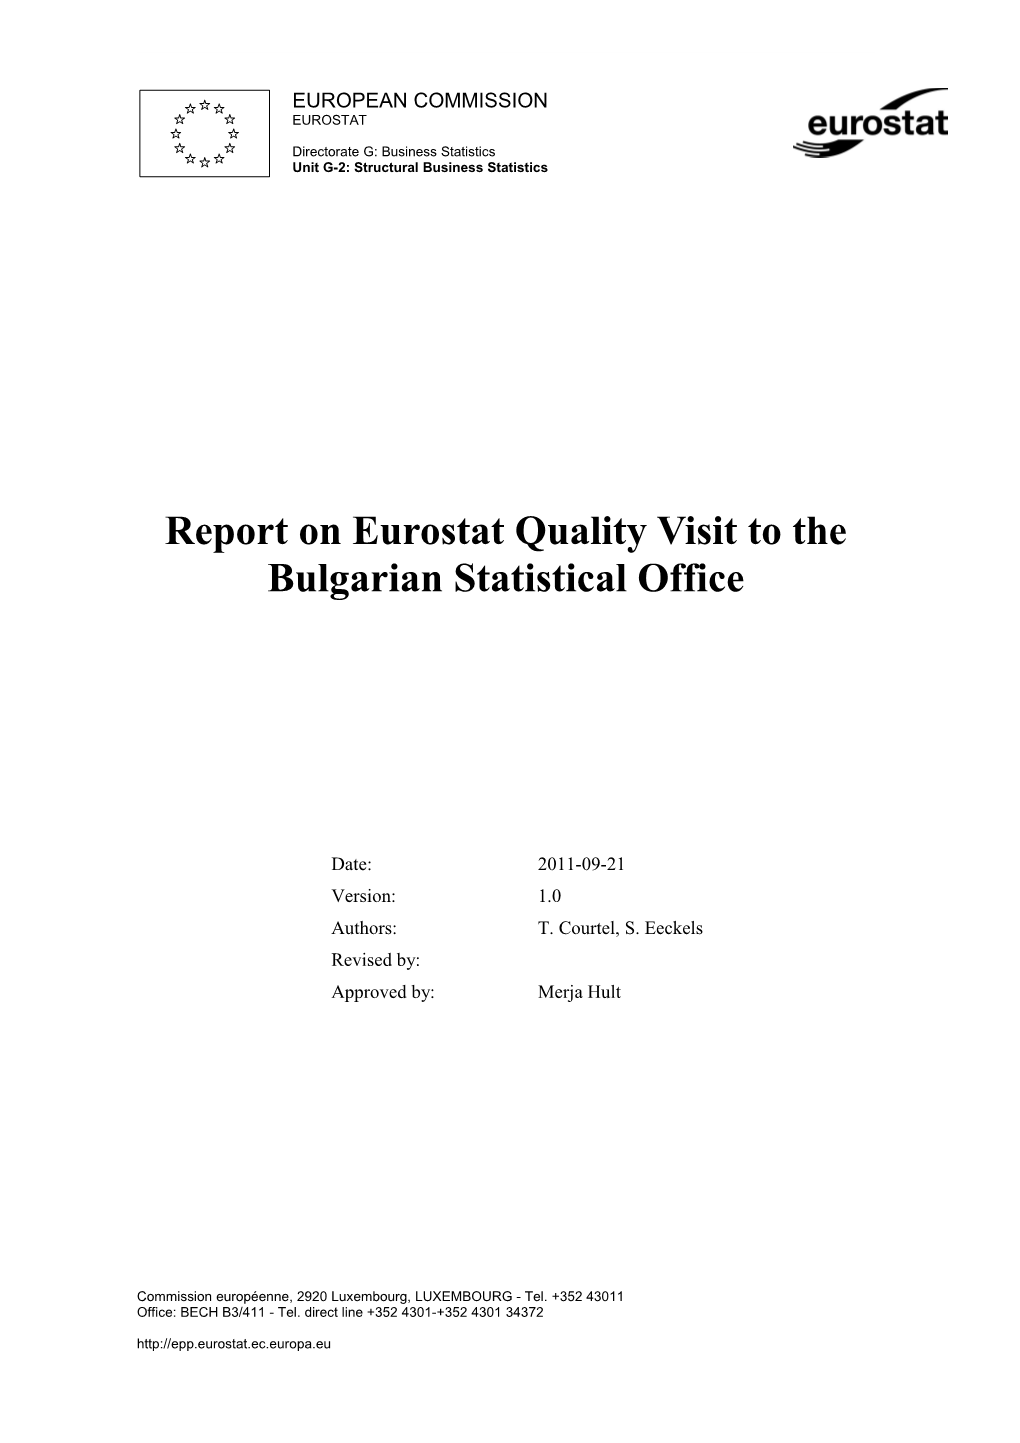 Report on Eurostat Quality Visit to the Bulgarian Statistical Office